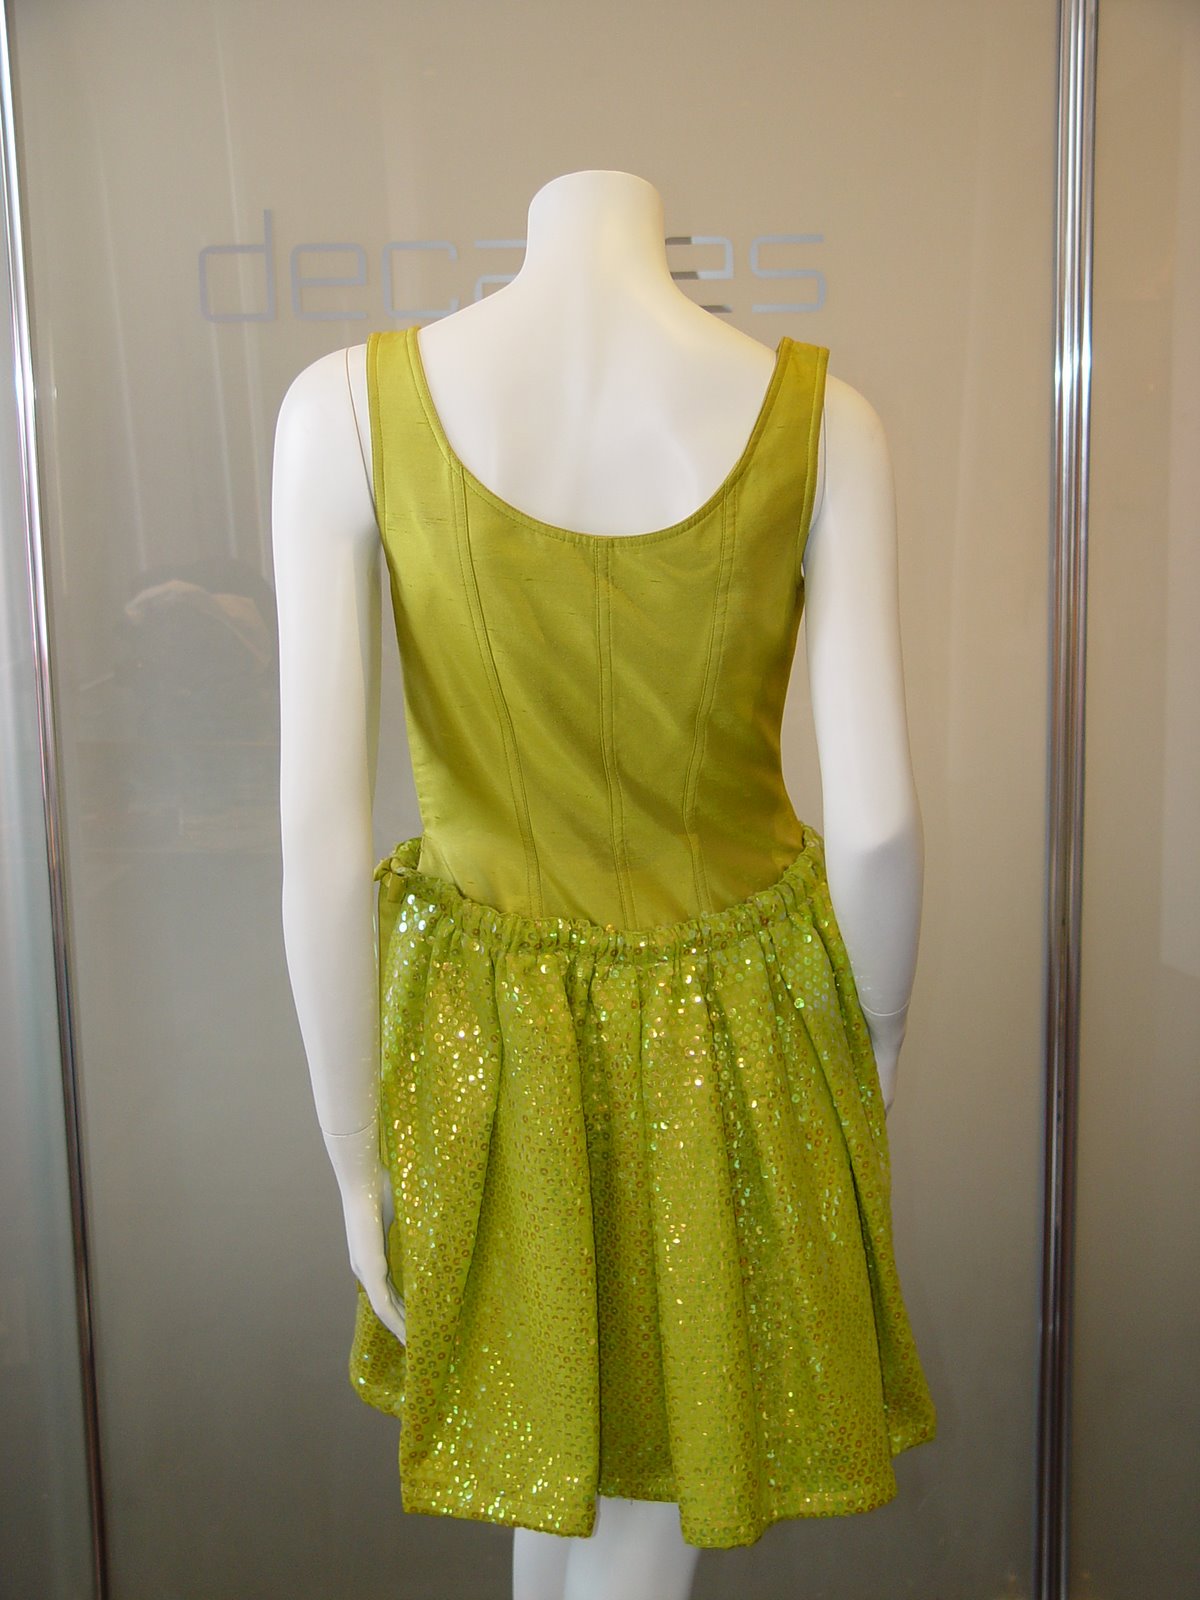 [CHRISTIAN+LACROIX+SUMMER+1995+LIME+DRESS+WITH+RAW+SILK+TOP+AND+PAILLETTE+SKIRT.JPG+(1).JPG]